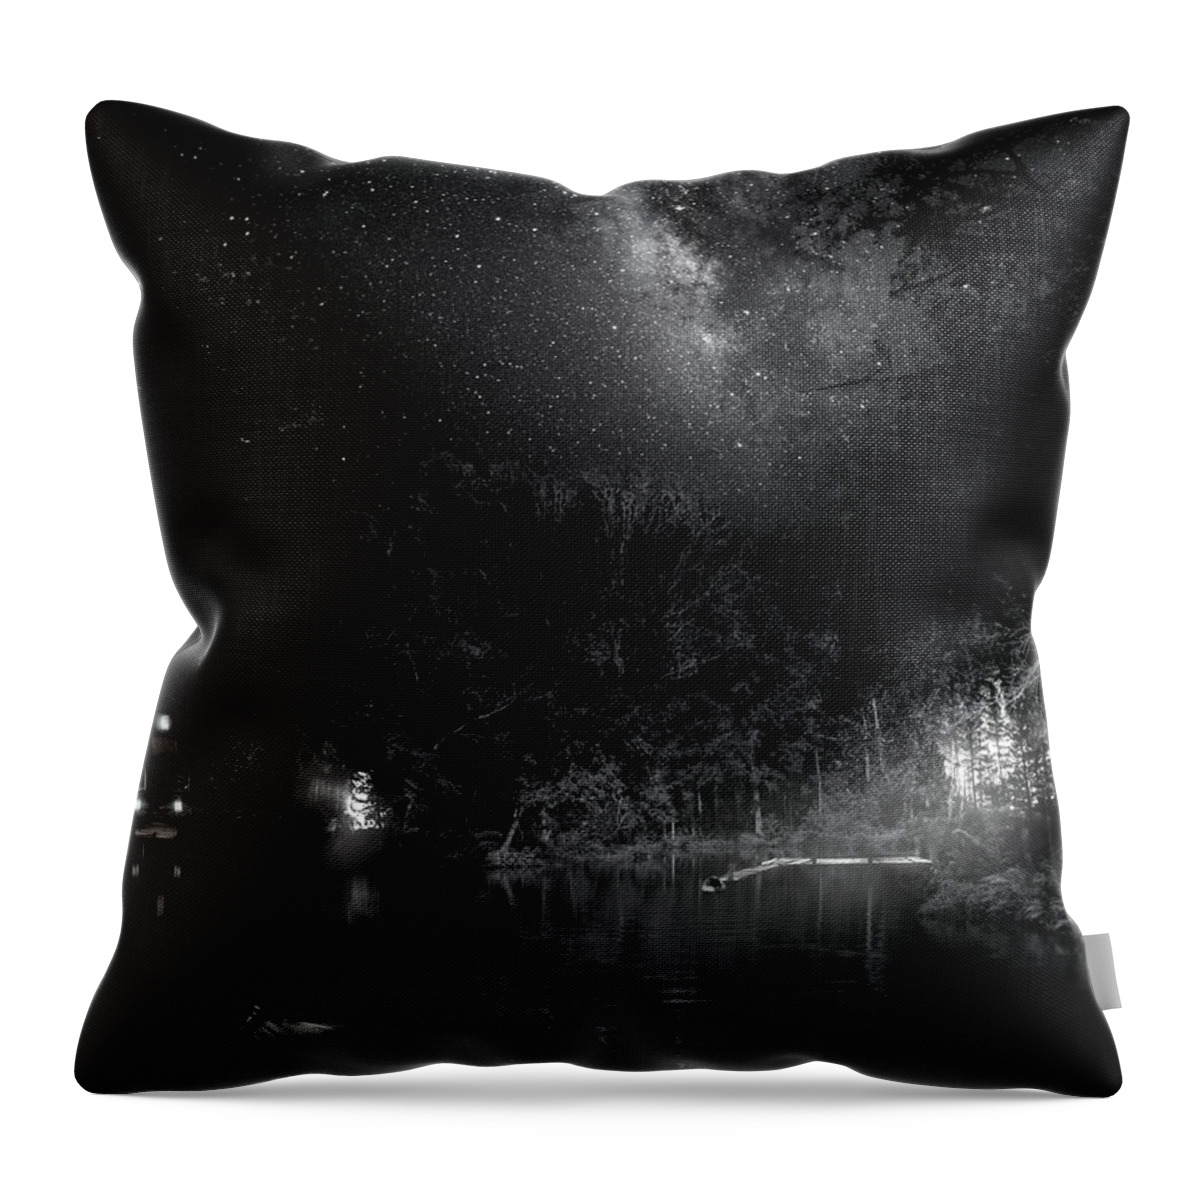 Milky Way Throw Pillow featuring the photograph Campfires on Milky Way River by Mark Andrew Thomas